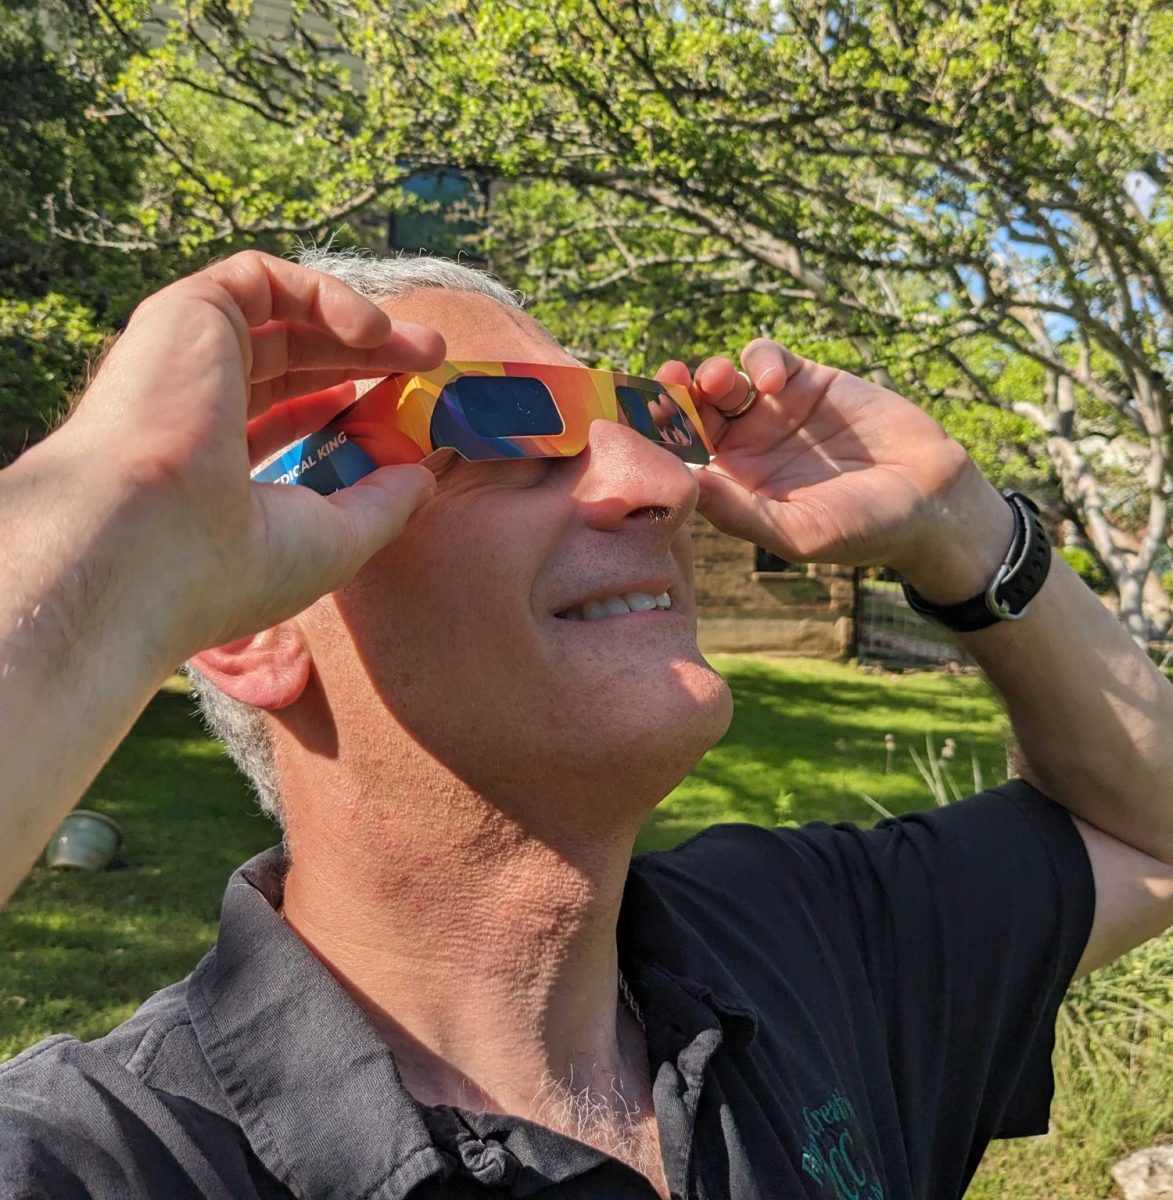 In preparation for the upcoming total solar eclipse, Austin resident Erik Schlanger practices using solar eclipse glasses. Those planning to observe the total eclipse have been encouraged to use these special shaded lenses to protect their eyesight from the suns harsh rays.